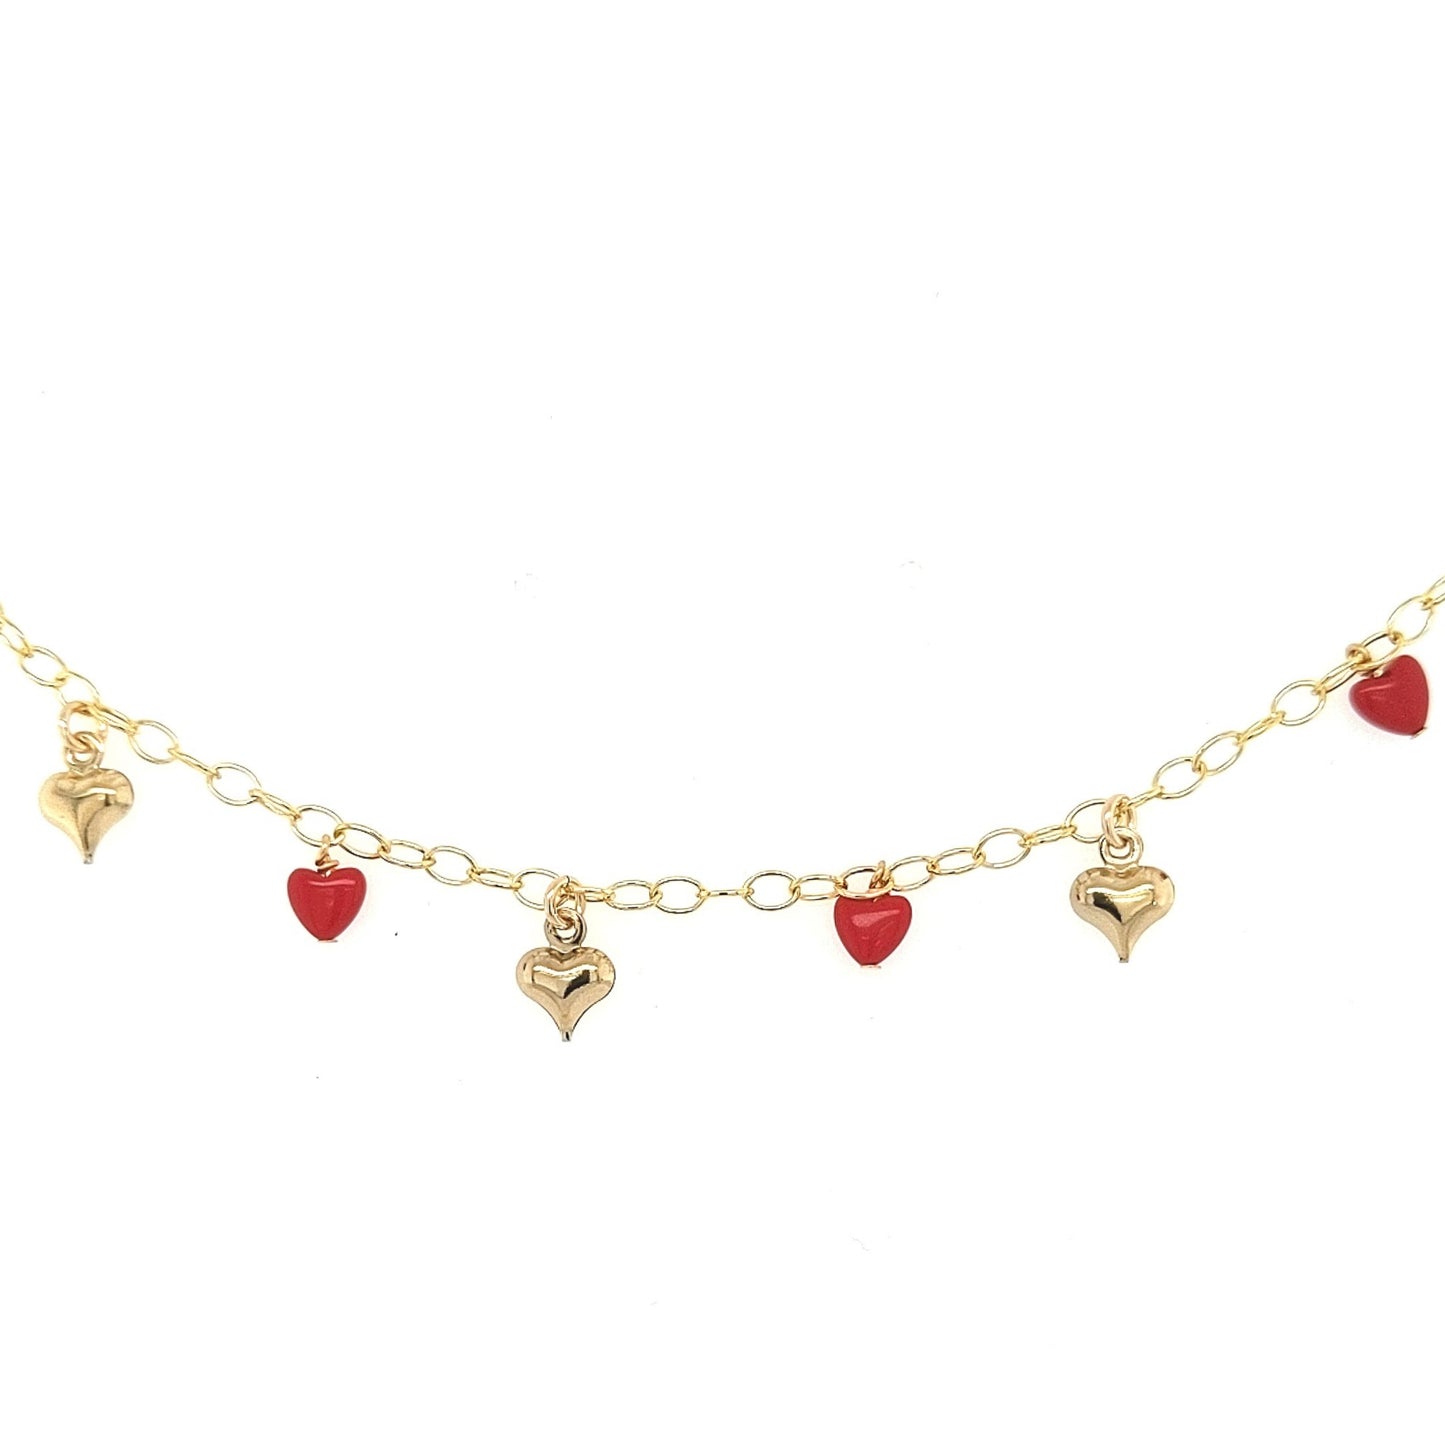 Gold Filled Chain With Alternating Small Puffy Gold and Red Hearts Bracelet - HK Jewels